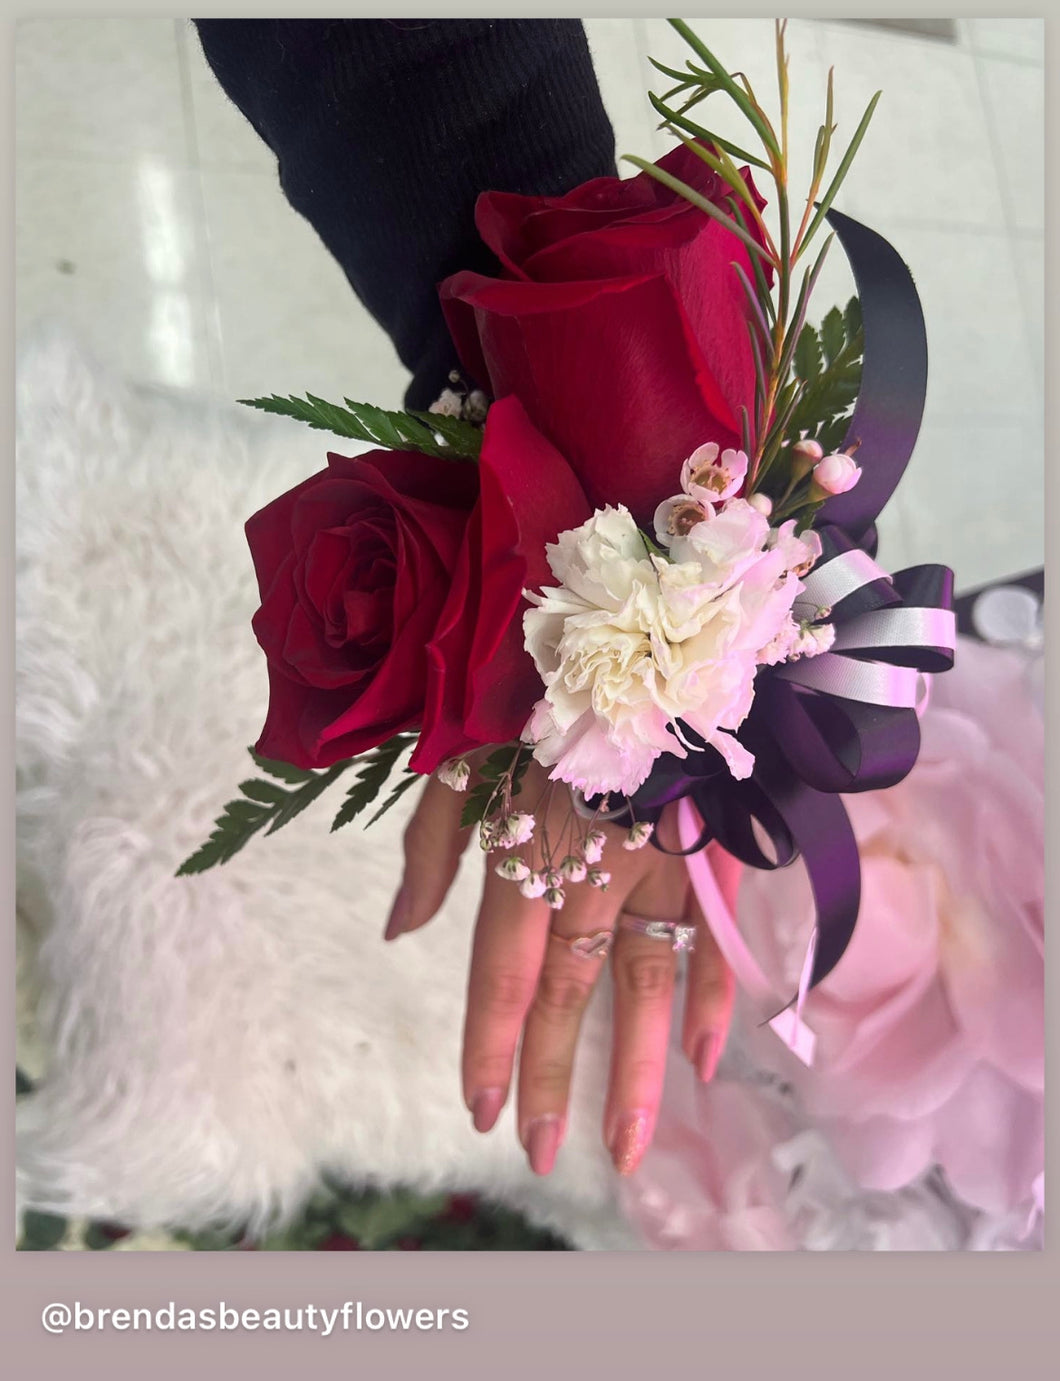 Red roses and carnation wrist corsage